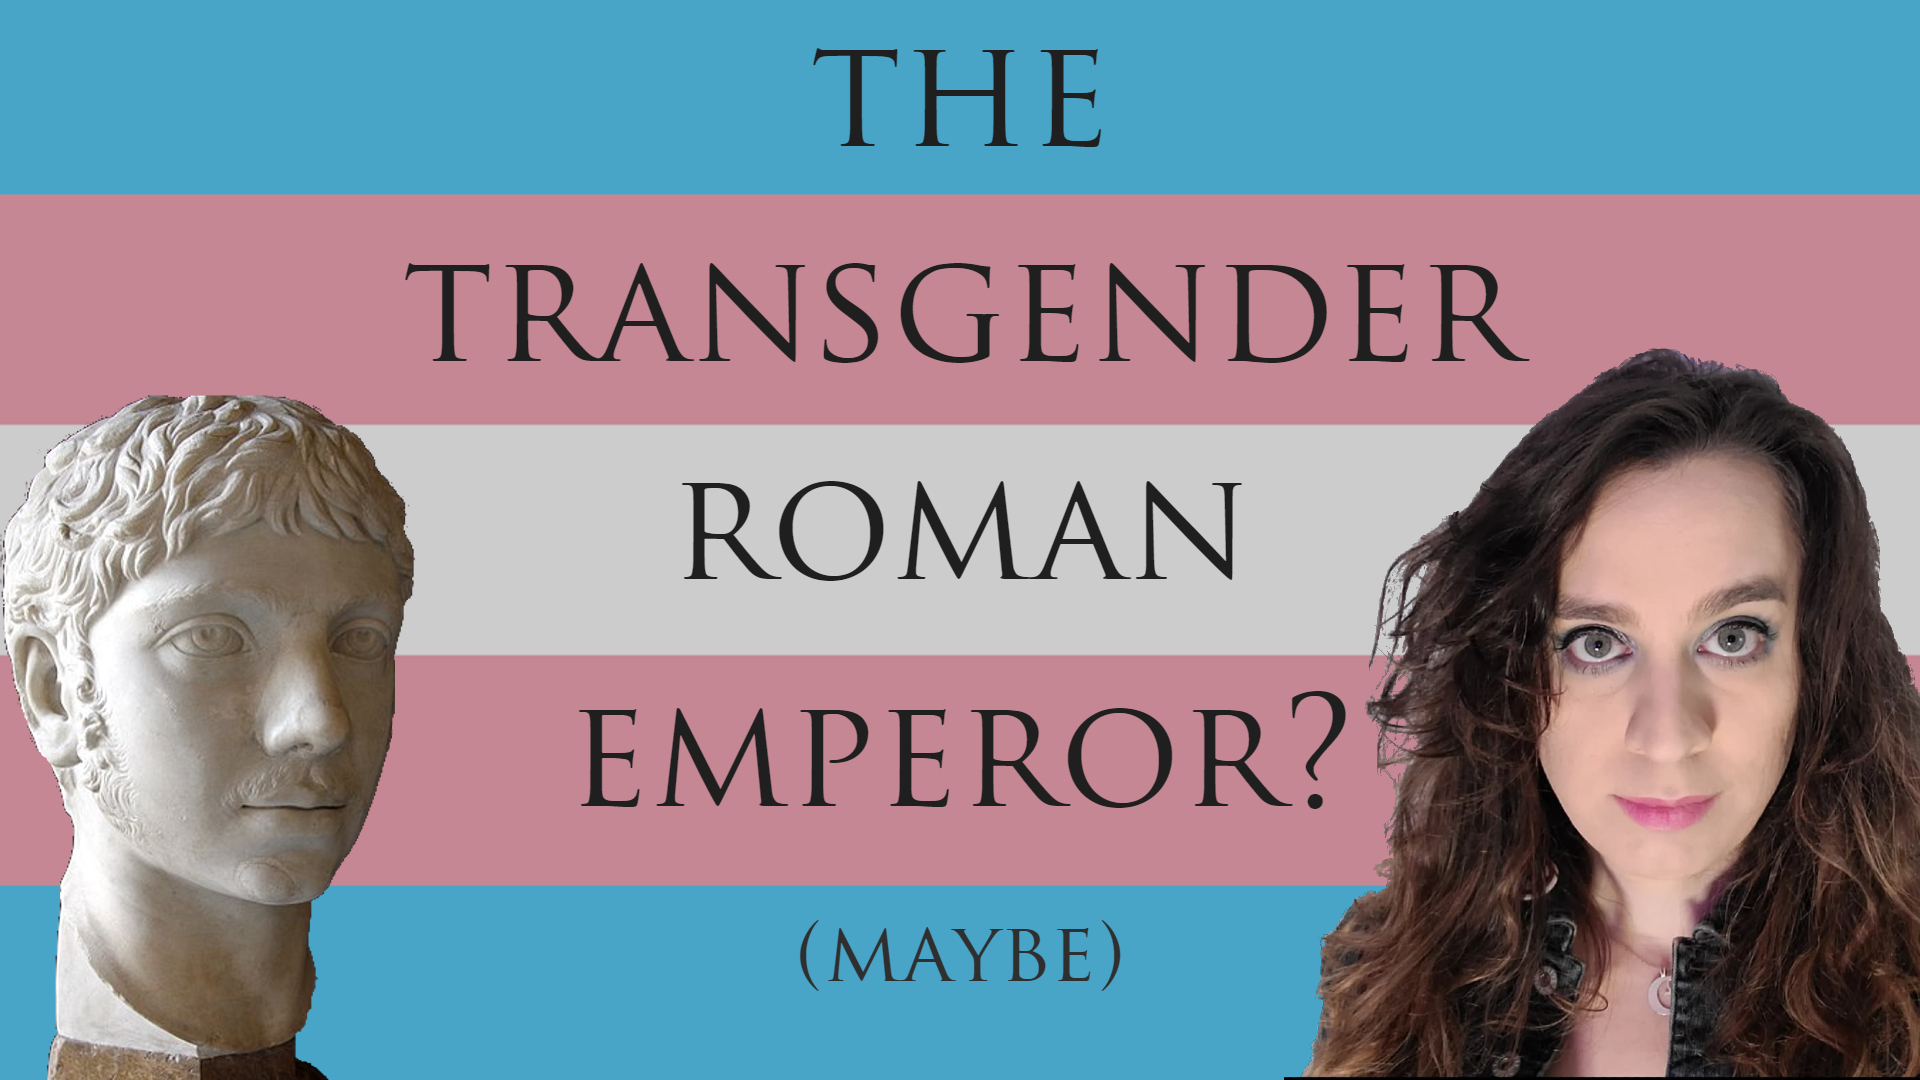 Sophie on the right, a bust of the Roman emperor Elagabalus on the left, atop a trans flag. Between is the text "The transgender Roman emperor? (Maybe)"